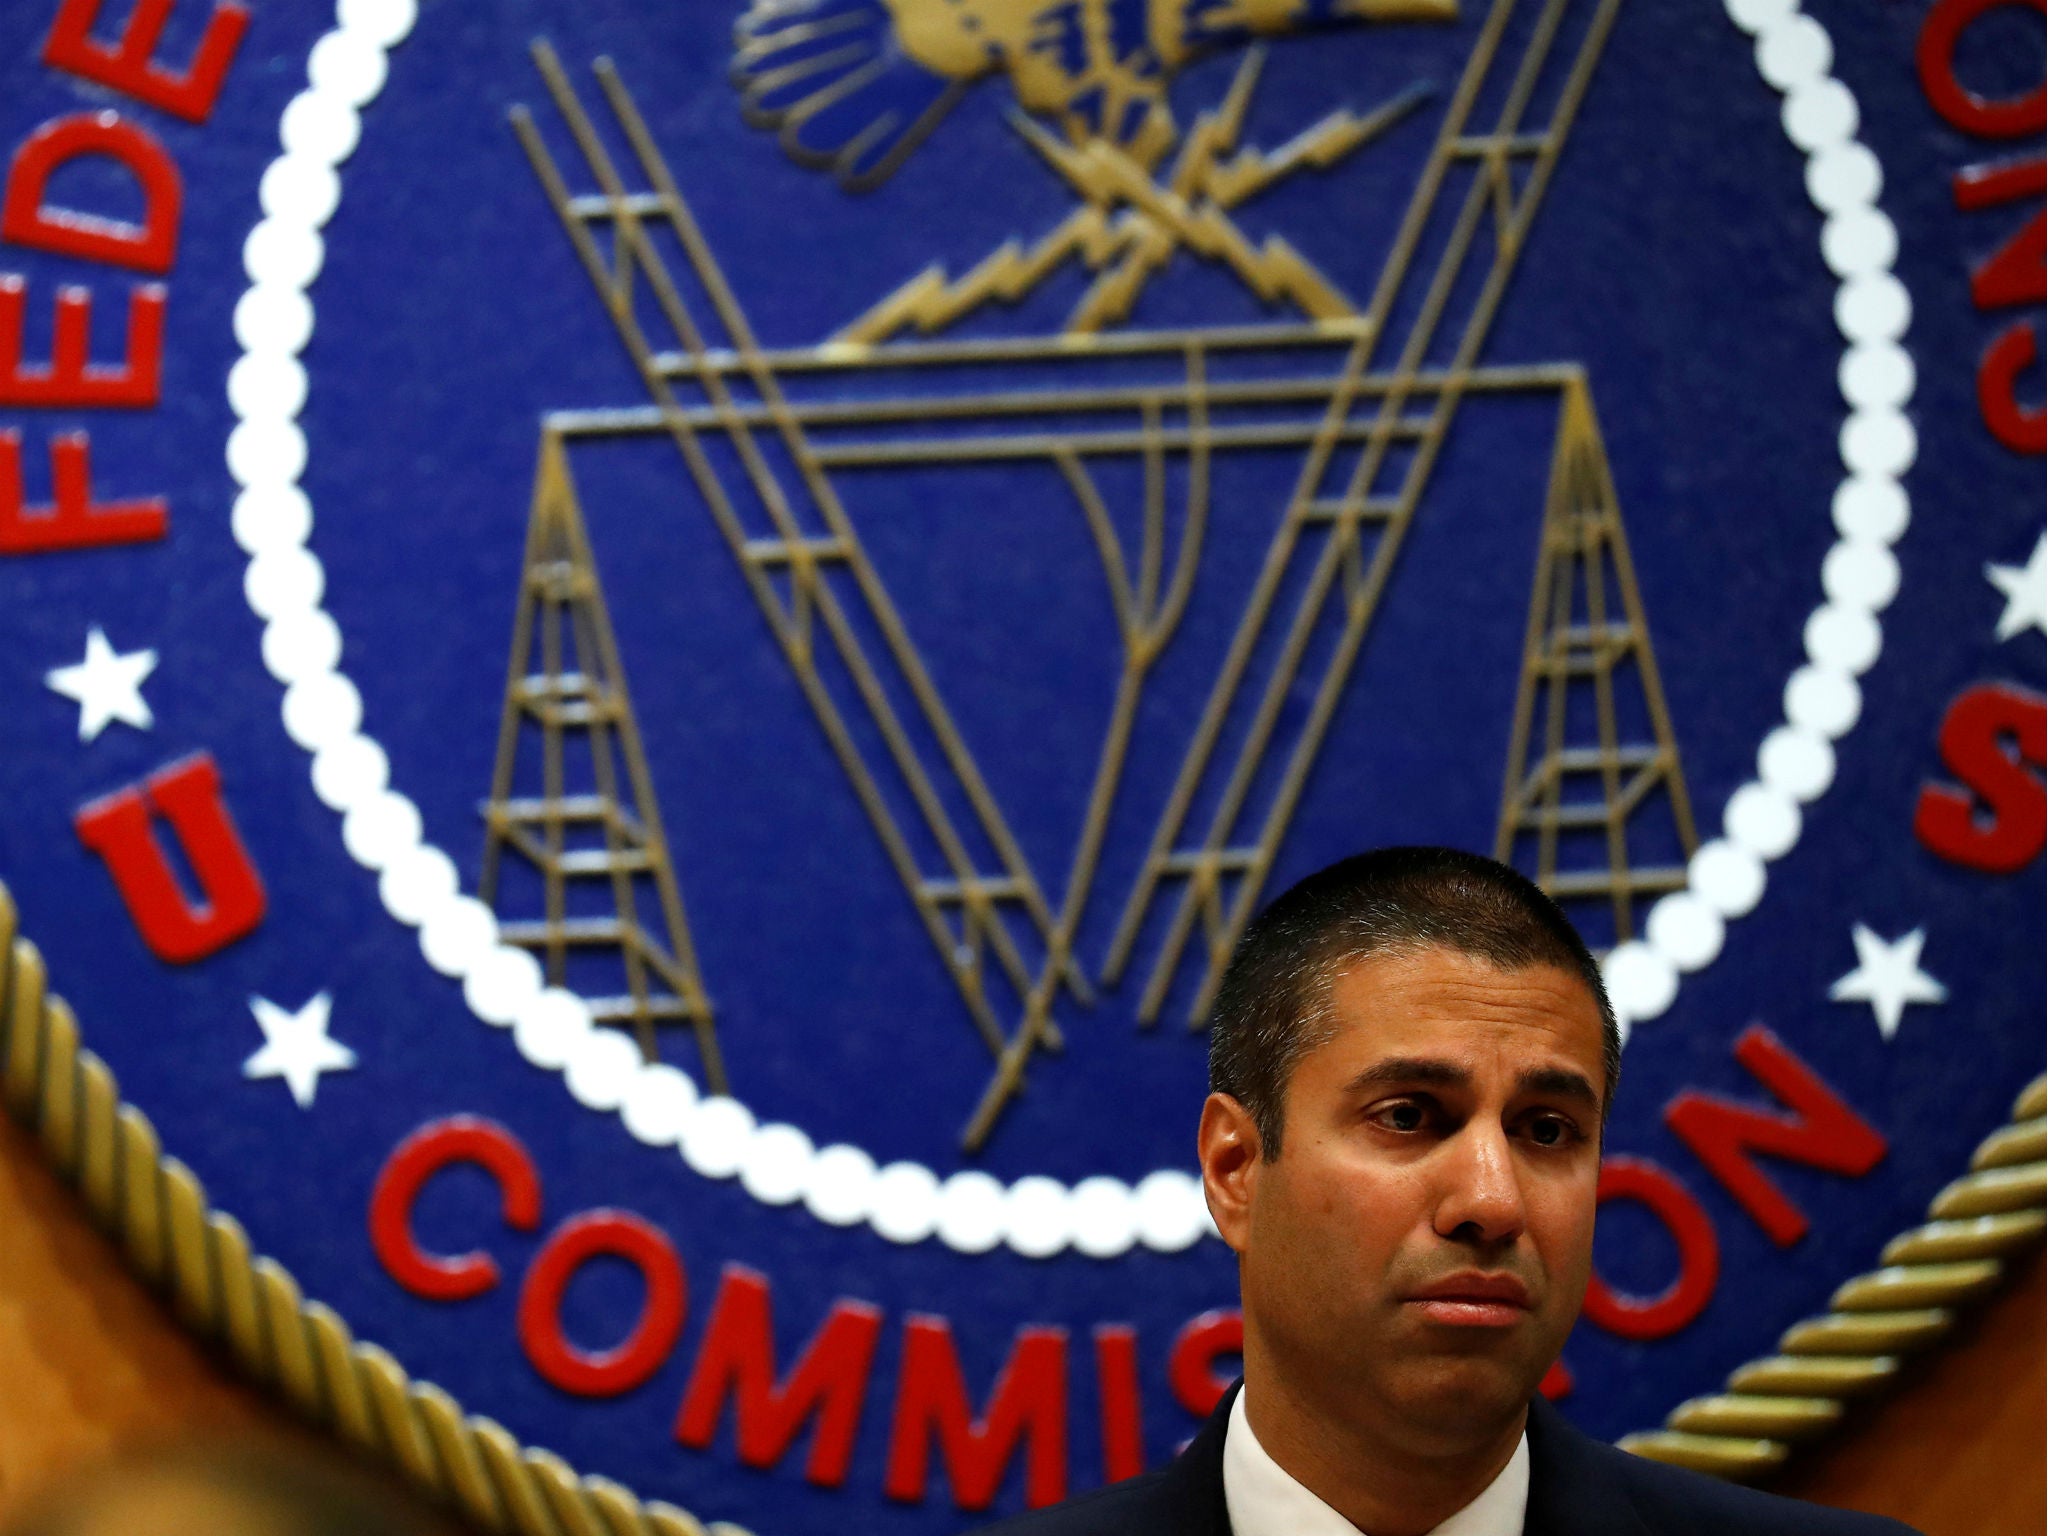 Federal Communications Commission chairman Ajit Pai speaks ahead of the to repeal net neutrality rules